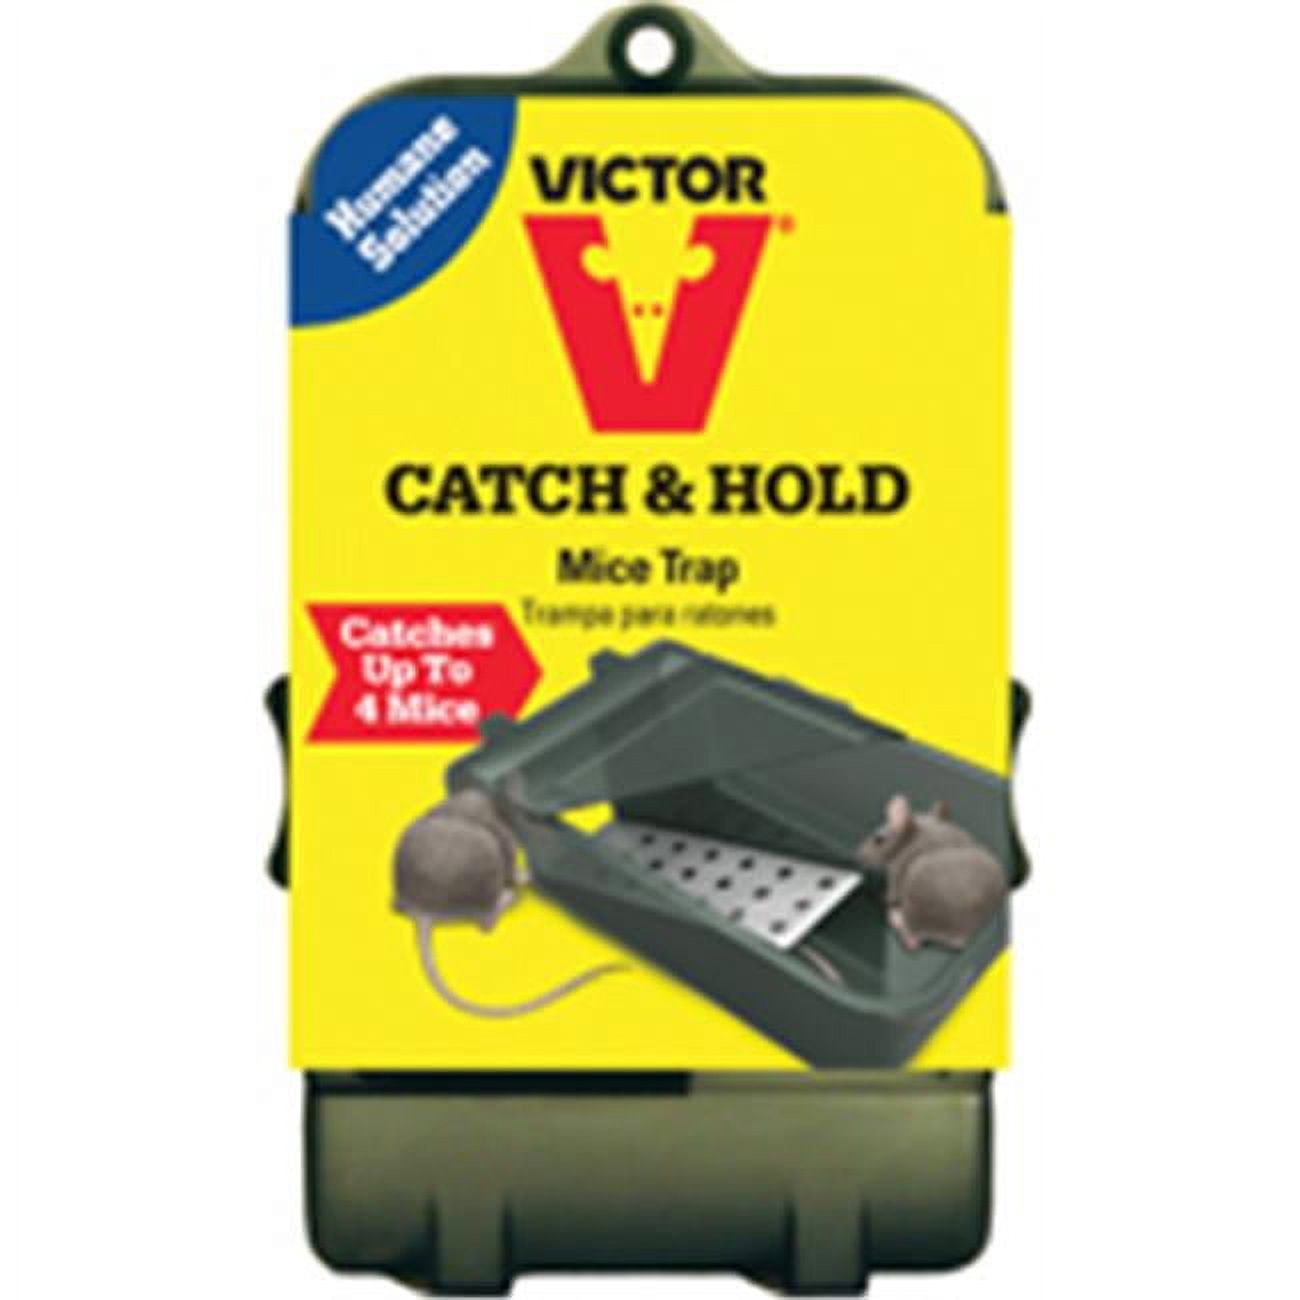 Buy Victor Mouse Trap online